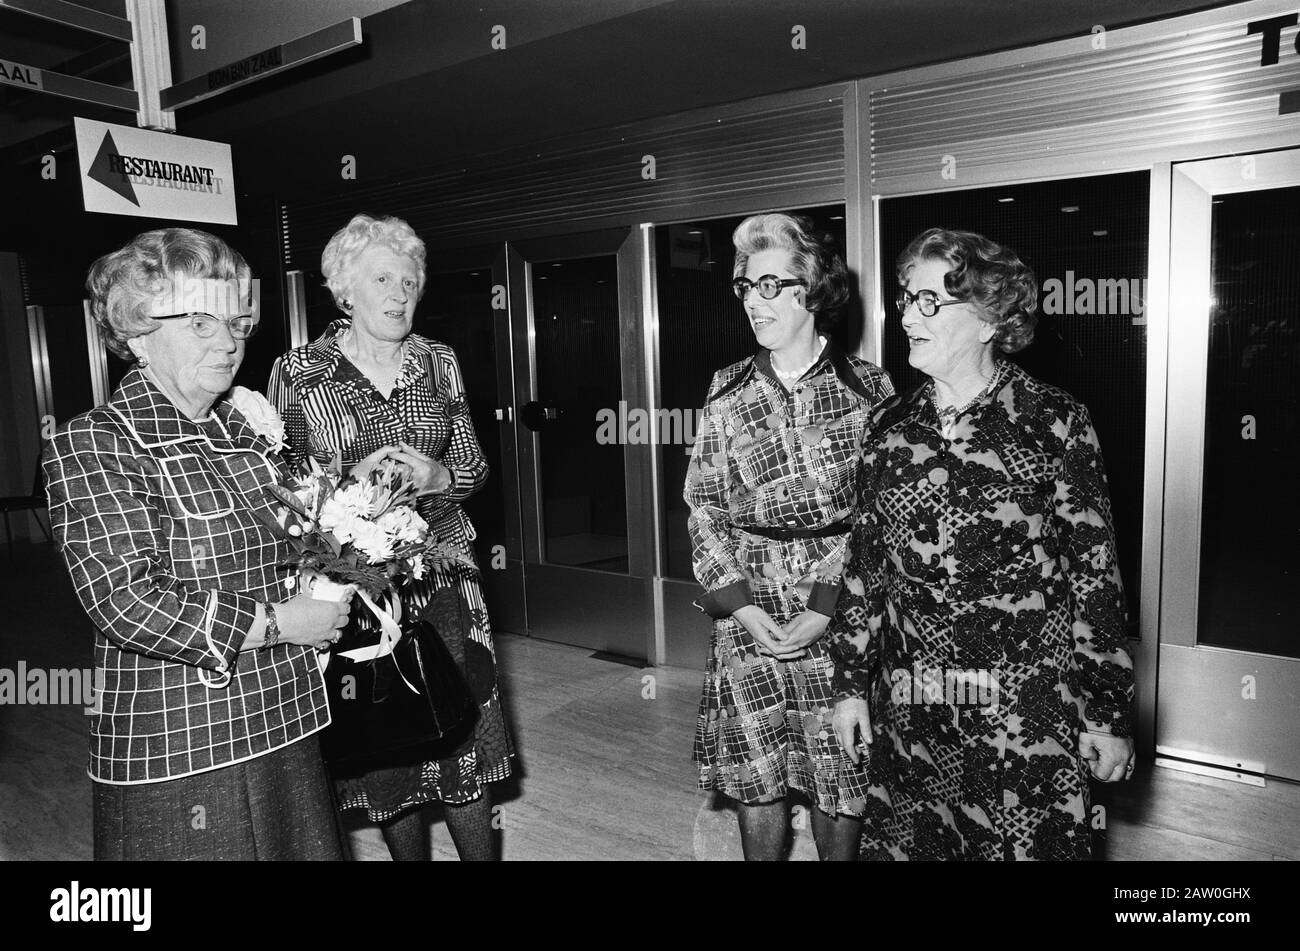 Queen Juliana installation of Women in The Hague v.l.n.r. Queen Juliana, Mrs. Richters, Dr N. Rump (President) and Mr. J. Muller Date:.. April 15, 1975 Location: The Hague, South Holland Keywords: WOMAN COUNCILS, plants, queens, presidents Person Name: Juliana (queen Netherlands)  : Mieremet, Rob / Anefo Copyright Holder: National Archives Material Type: Negative (black / white) archive inventory number: see access 2.24.01.05 Stock Photo